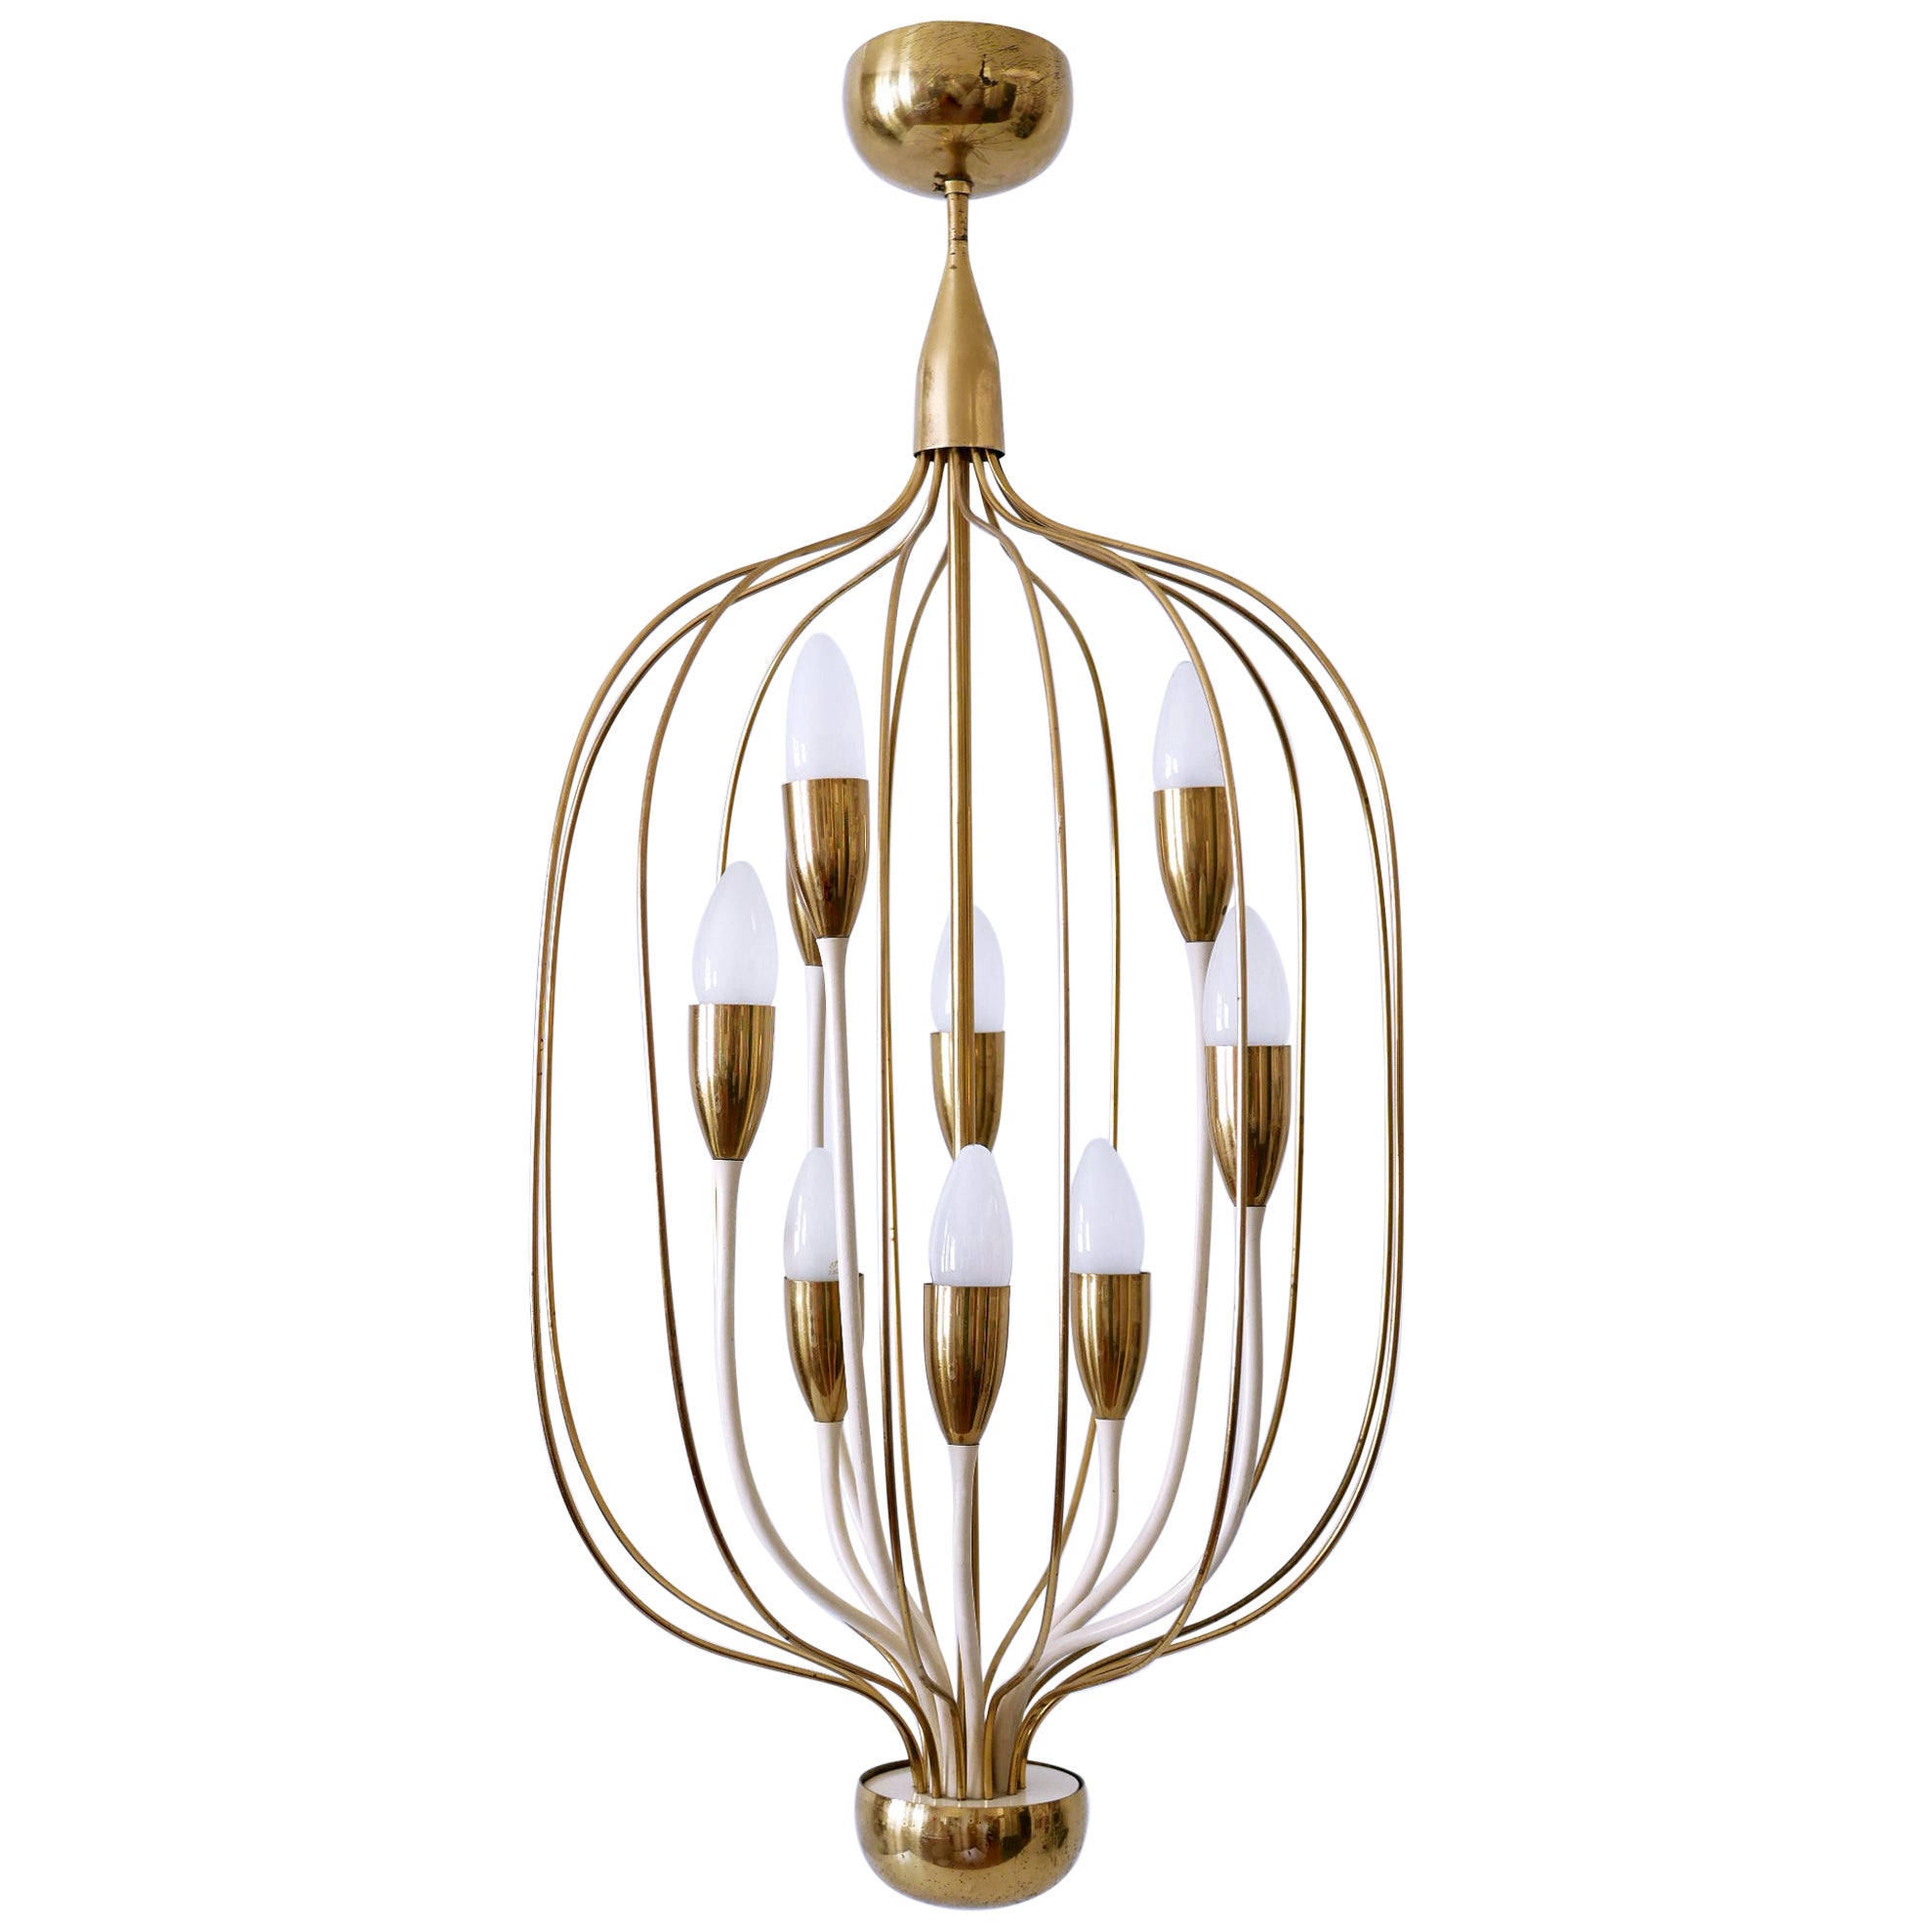 Exceptional Mid-Century Modern Nine-Flamed Chandelier or Pendant Lamp 1950s